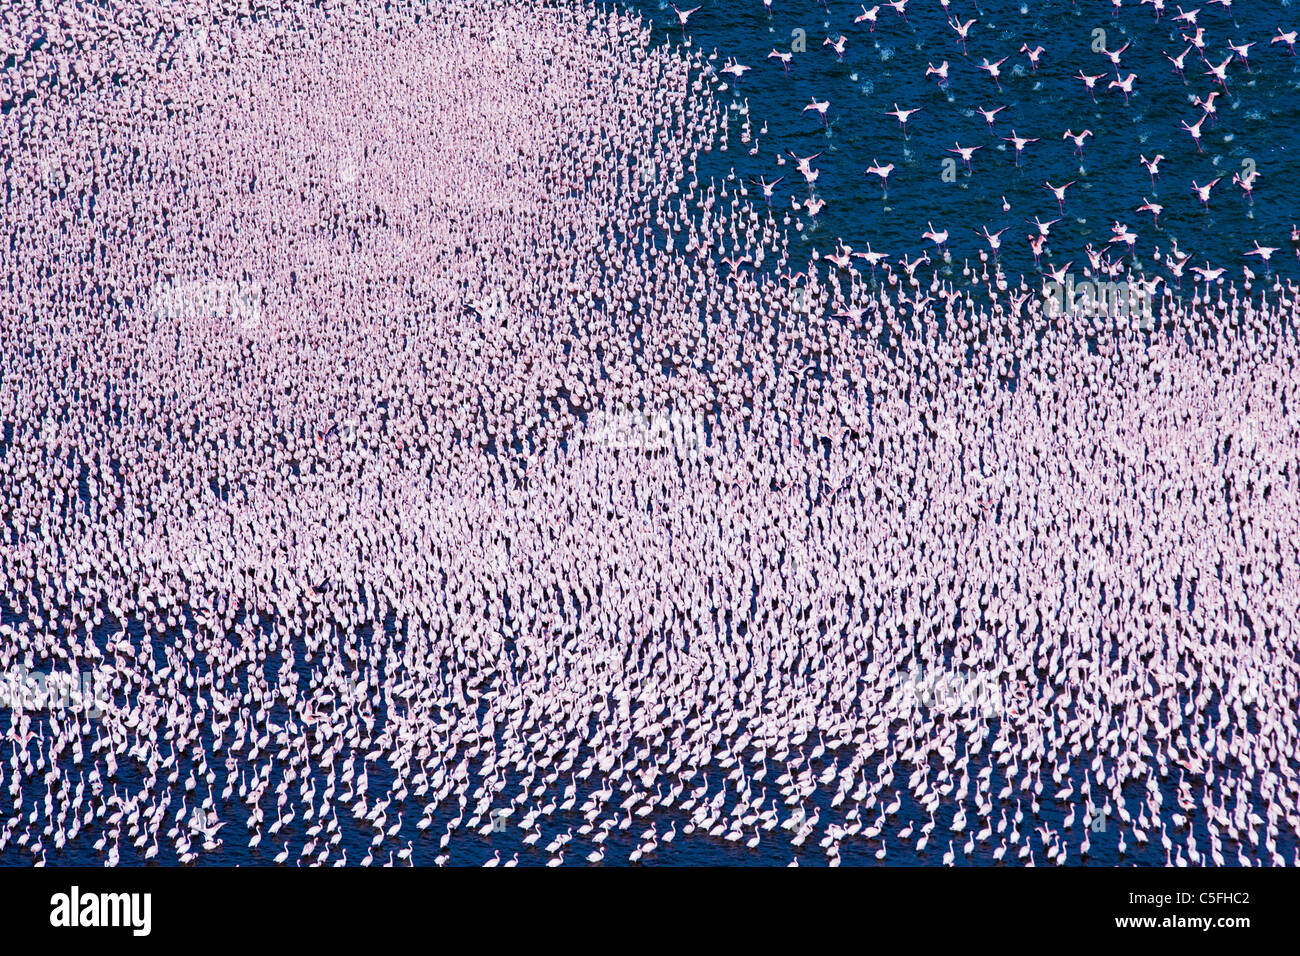 Aerial view of Lesser Flamingo (Phoenicopterus minor ) flying over Lake Bogoria that lies in a volcanic region Stock Photo